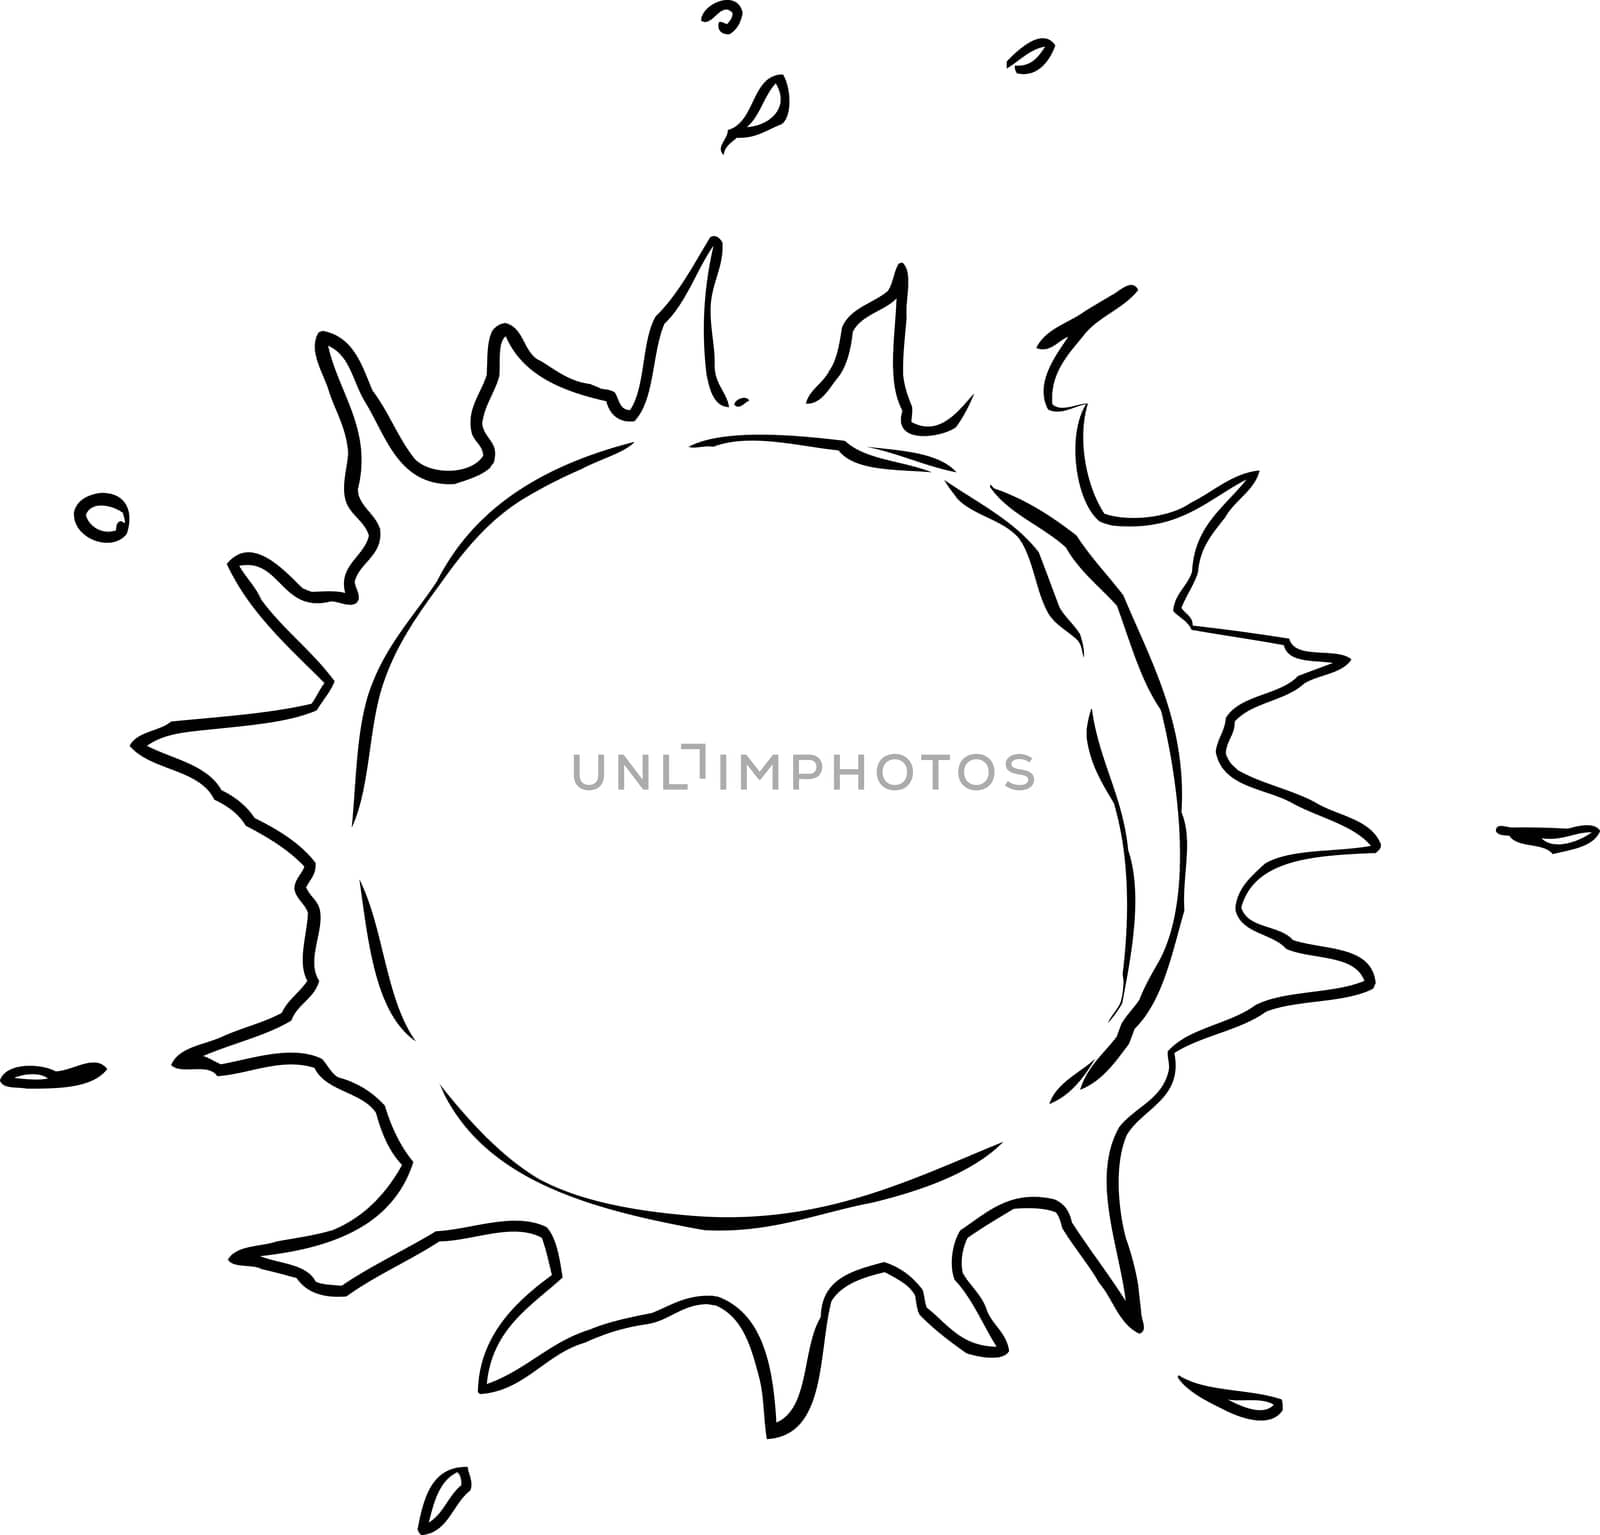 Outline Doodle of the Sun by TheBlackRhino